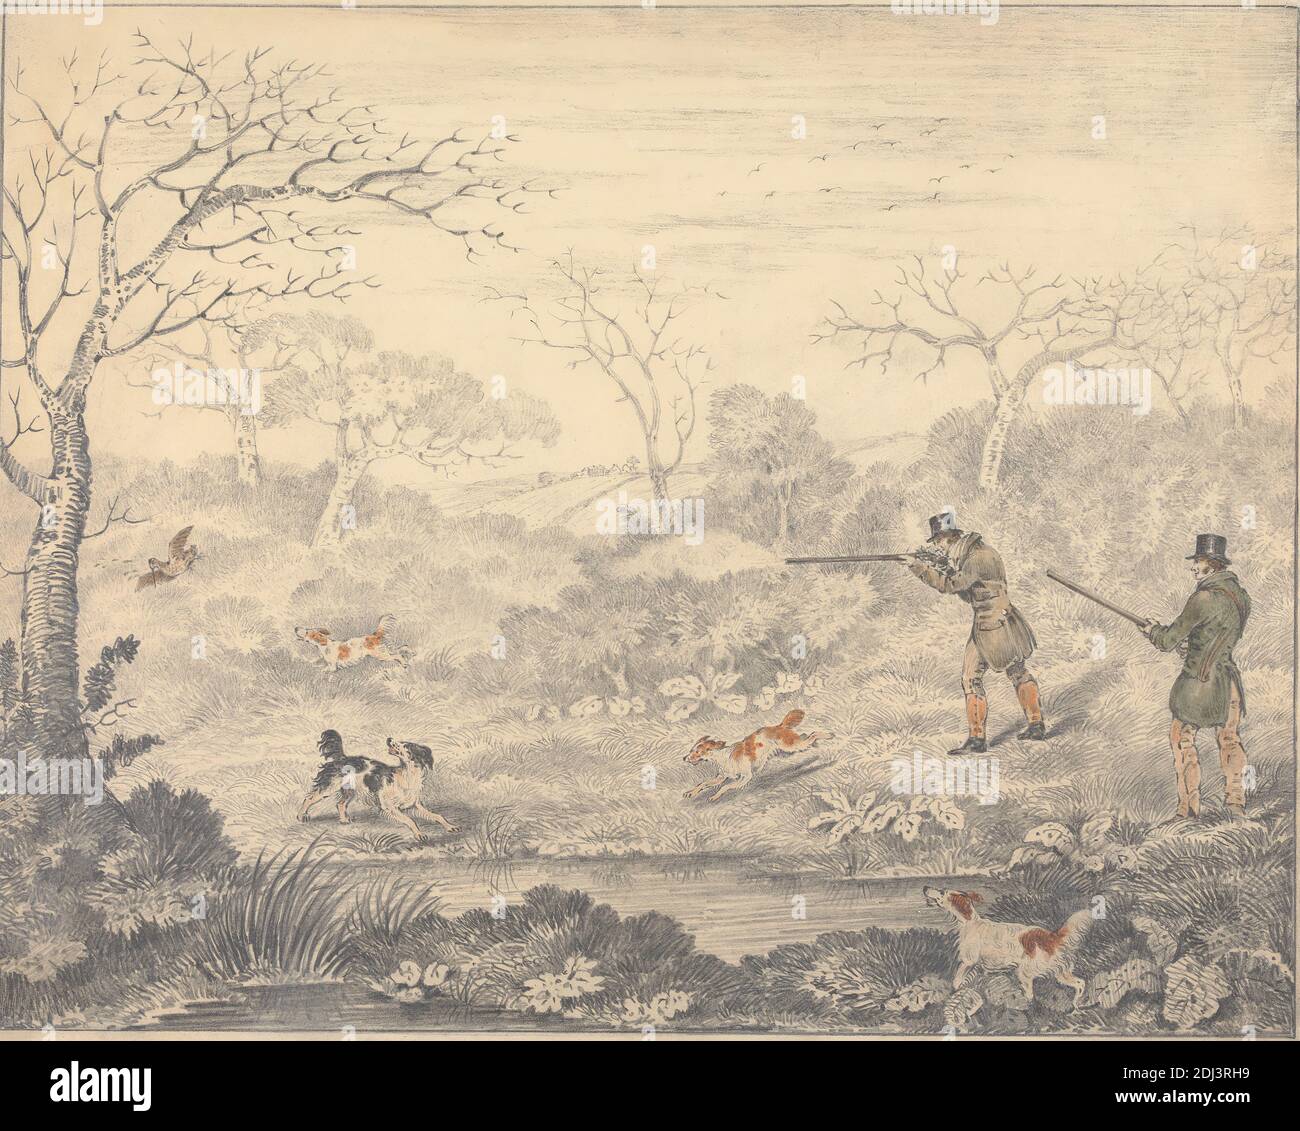 Woodcock Shooting, Edwin Gill, active 1810, died 1868, undated, Graphite and watercolor on medium, smooth, cream, wove paper, Sheet: 10 3/4 × 13 1/2 inches (27.3 × 34.3 cm) and Image: 10 1/2 × 13 1/4 inches (26.7 × 33.7 cm), dogs (animals), guns, hunting, hounds (dogs), hunters, hunting, landscape, men, pond, sporting art, trees, woodcocks (birds Stock Photo